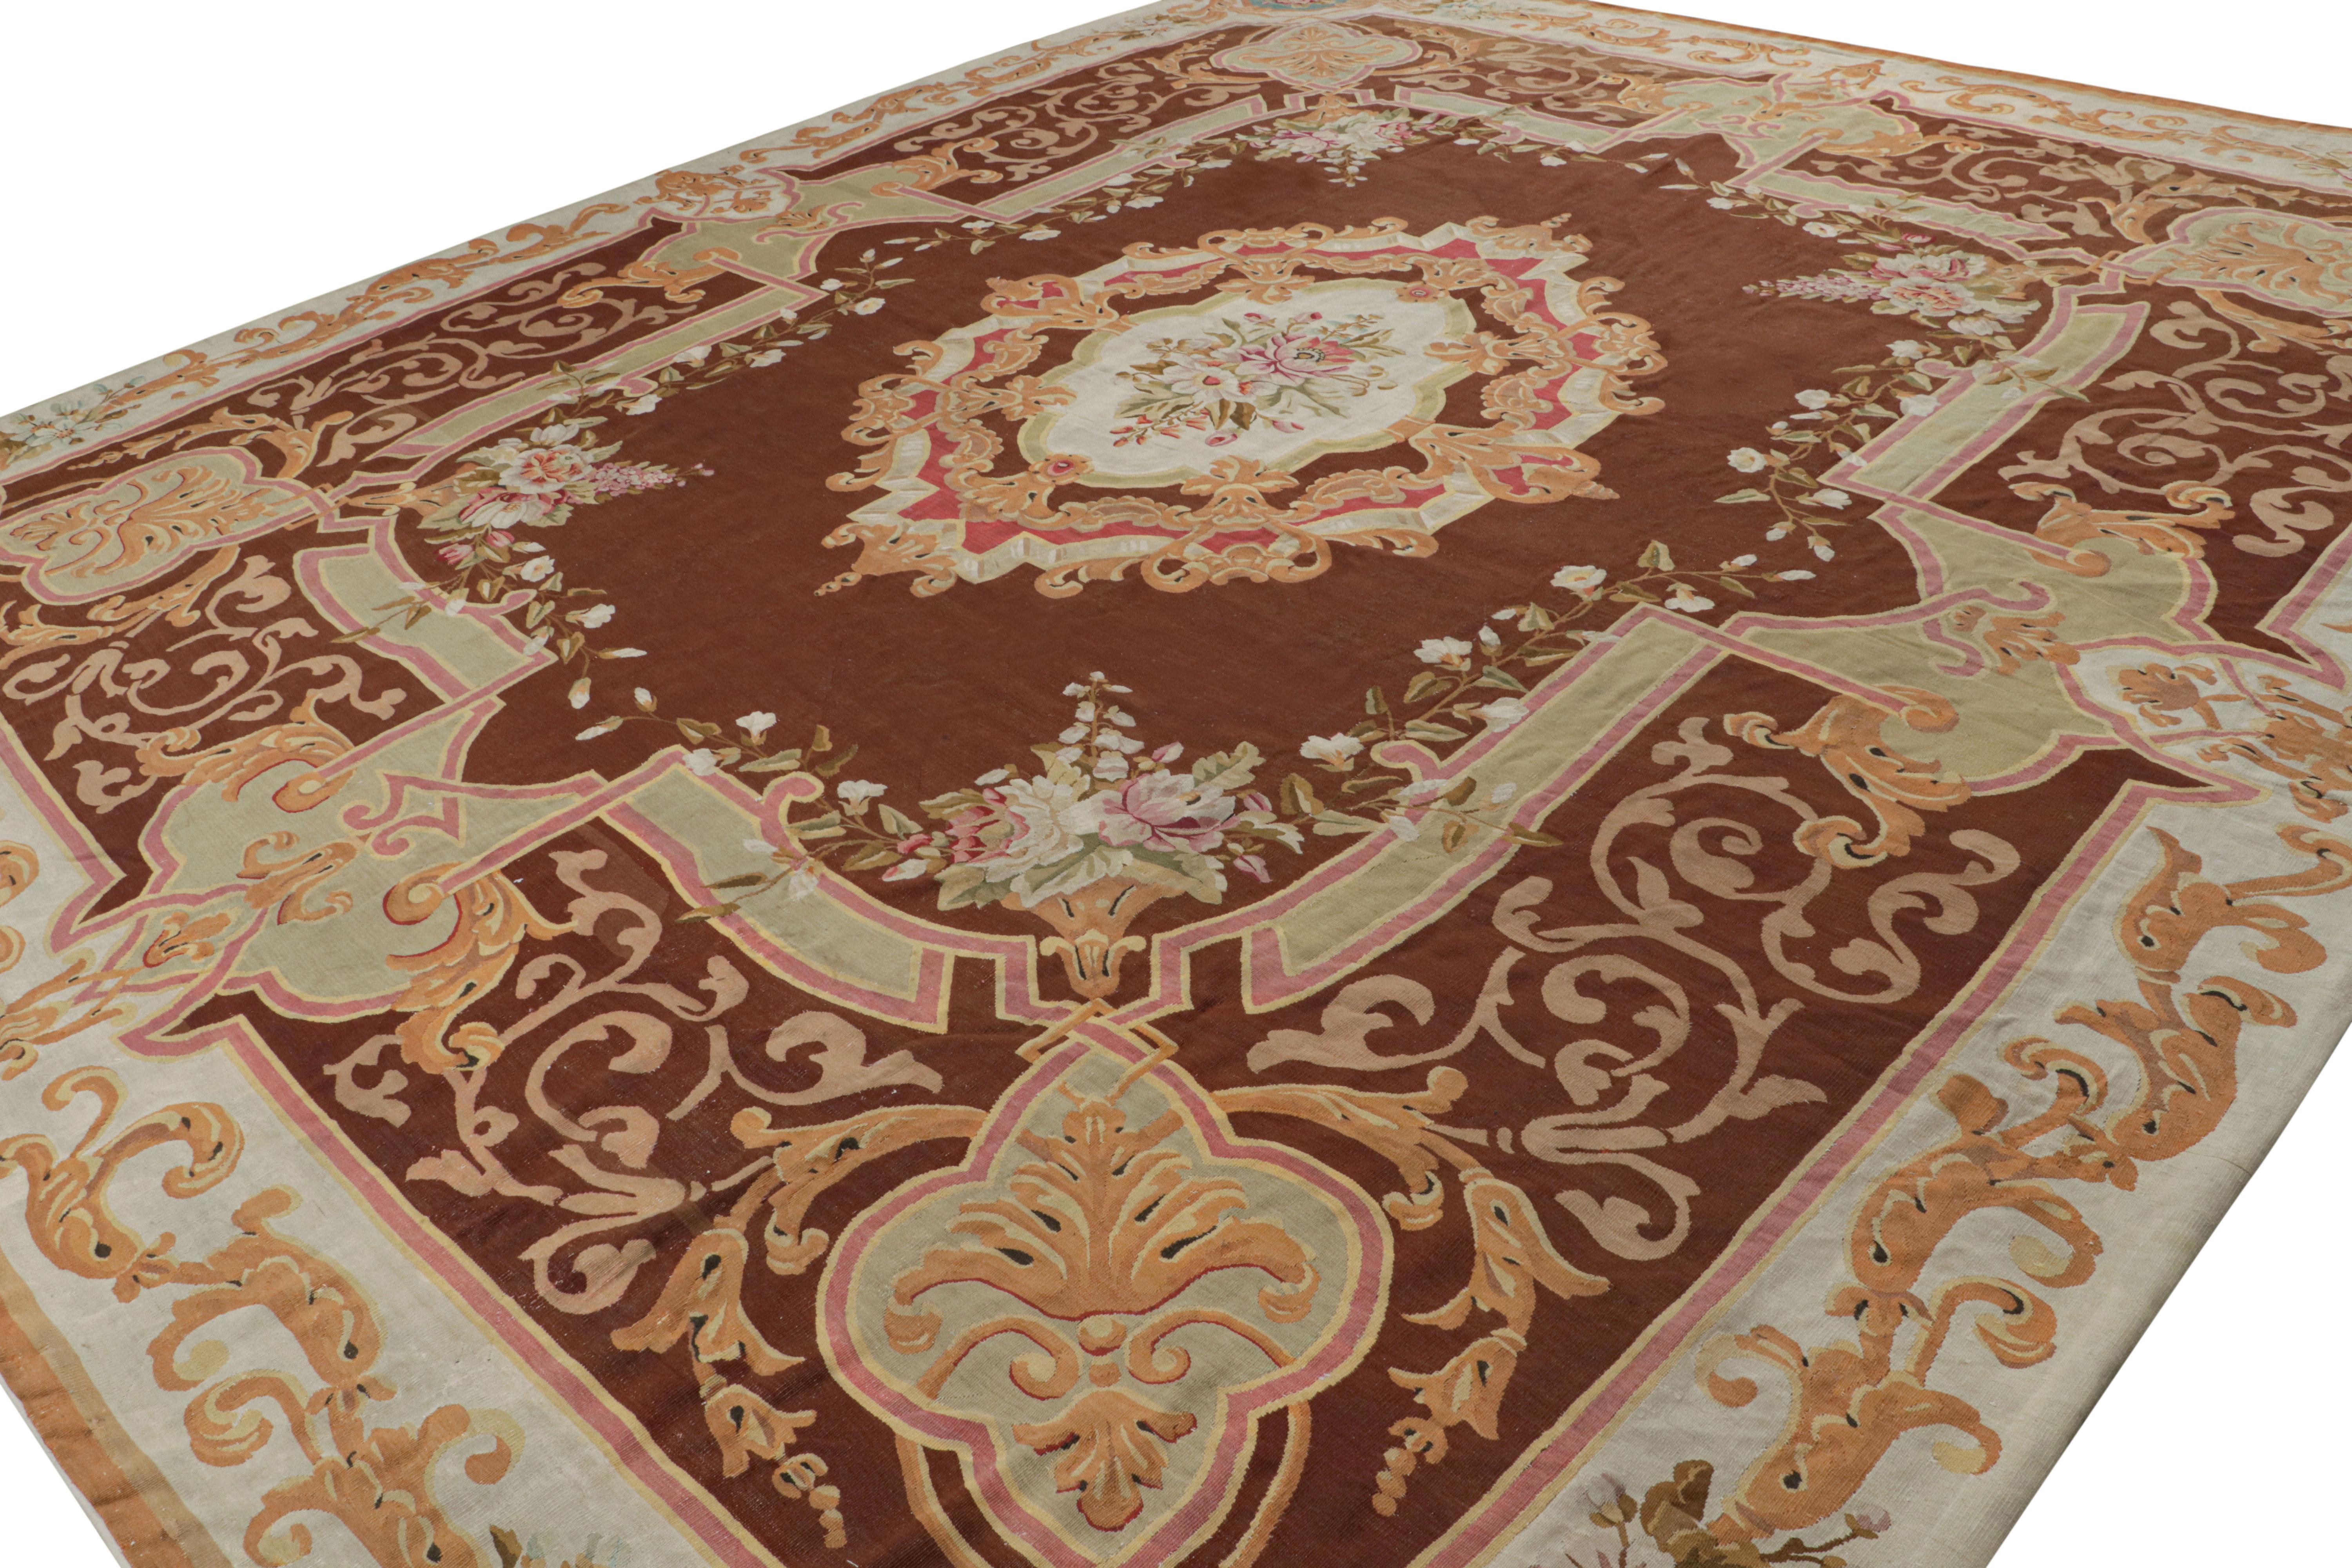 Hand-Woven Antique Aubusson Rug in Brown with Floral Medallion, from Rug & Kilim For Sale